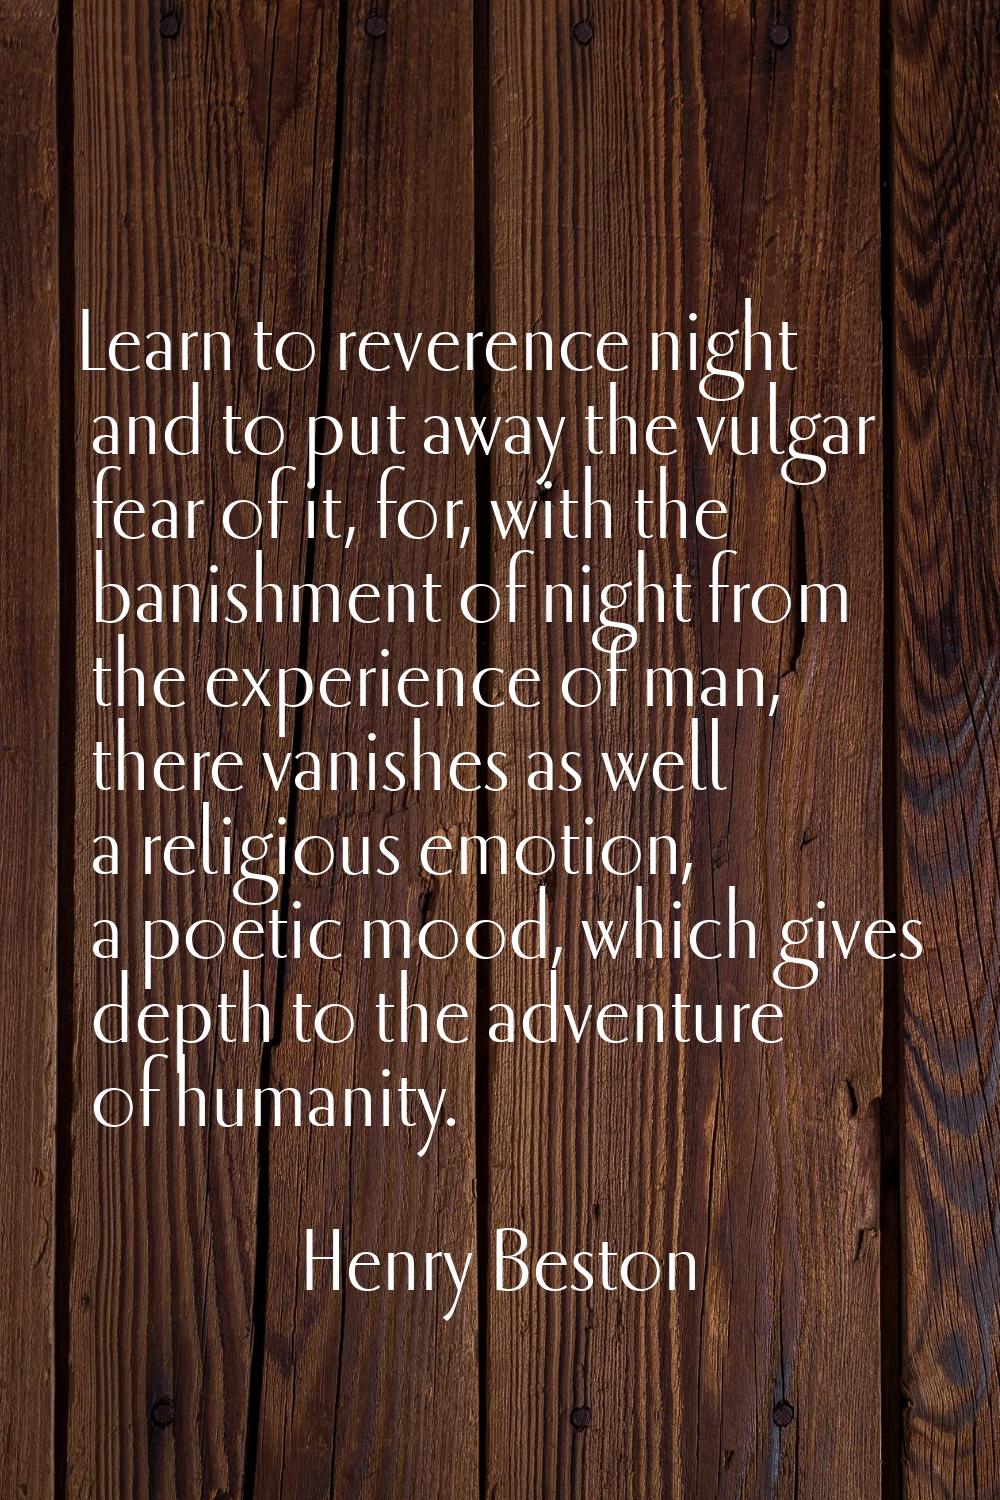 Learn to reverence night and to put away the vulgar fear of it, for, with the banishment of night f